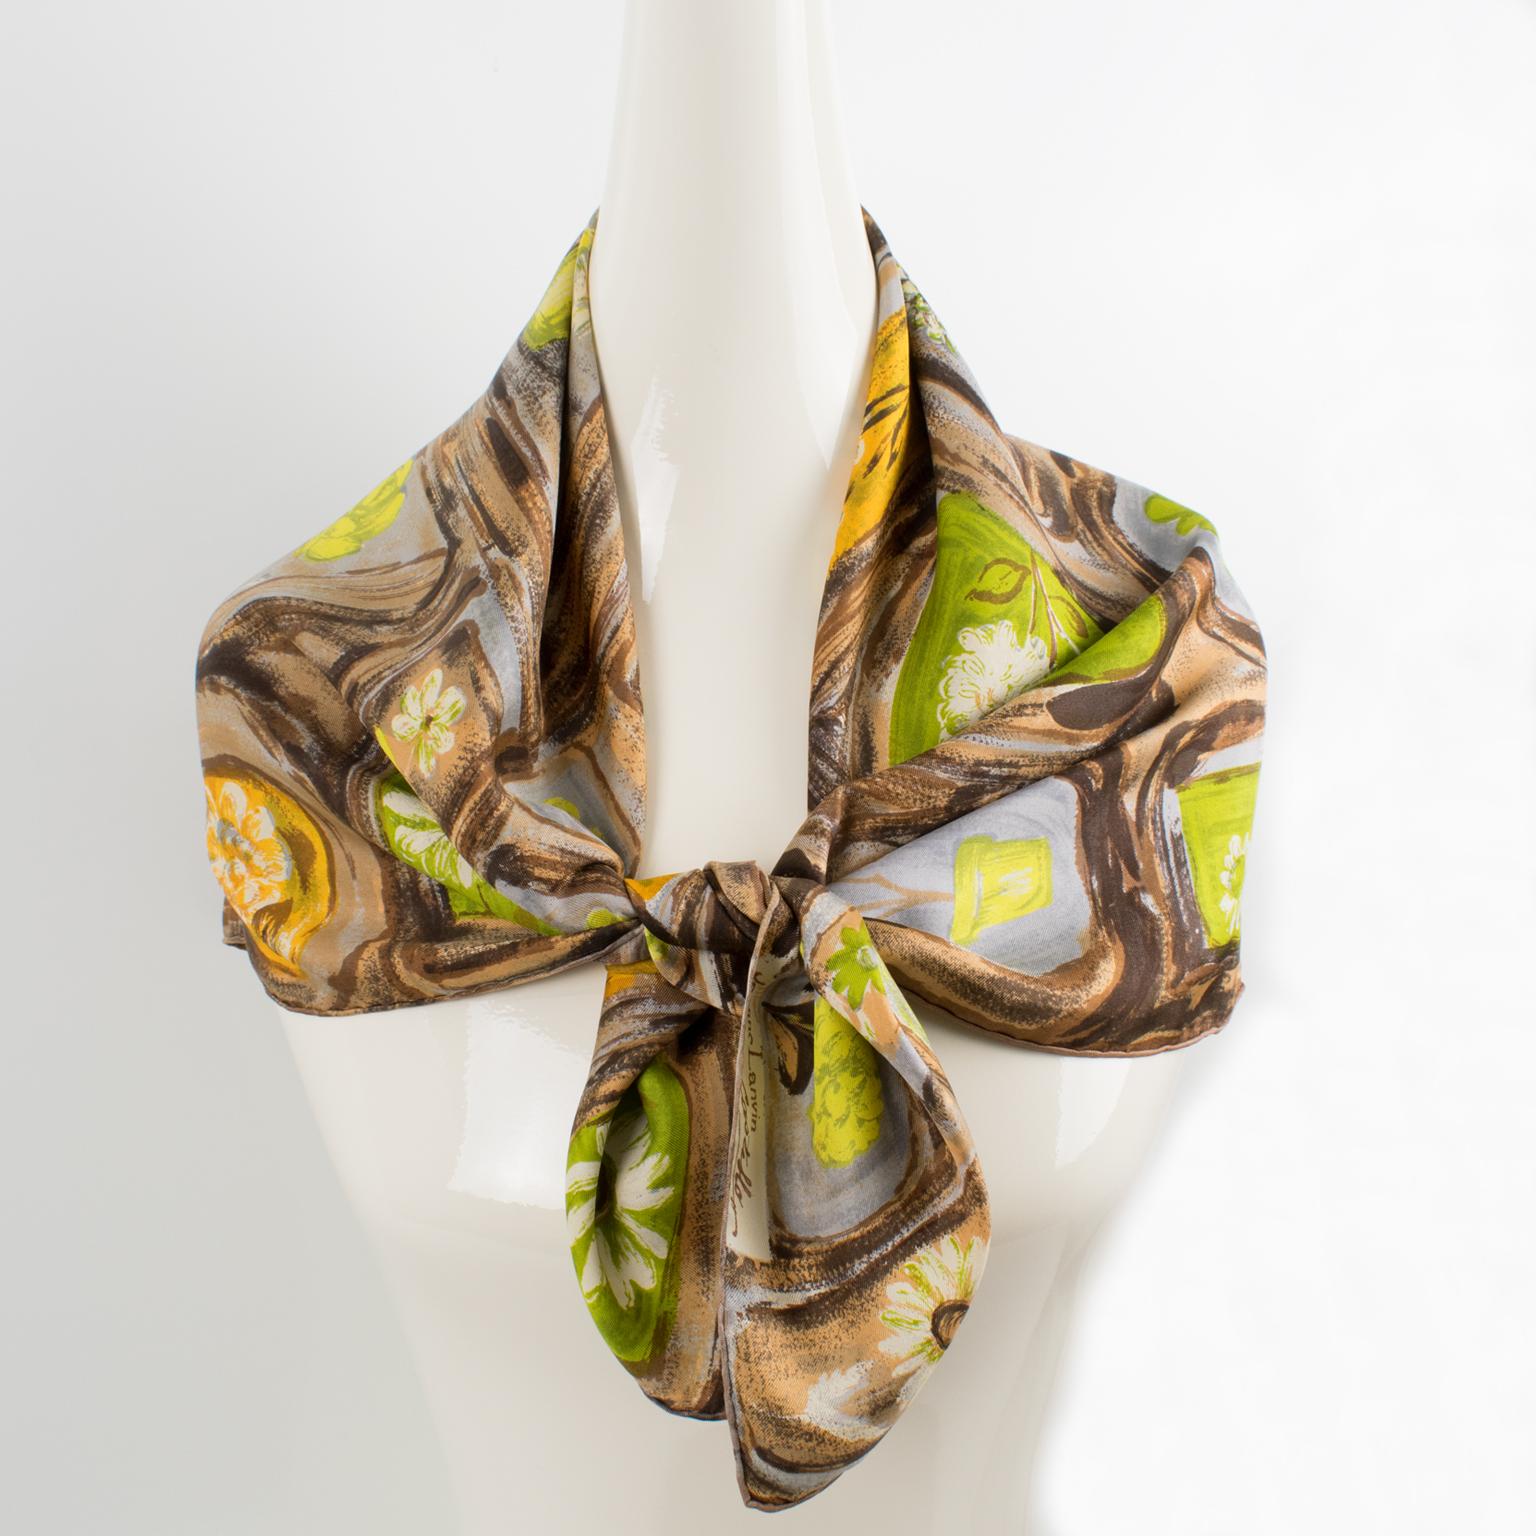 Antonio Castillo designed this stunning silk scarf for Jeanne Lanvin Paris in the 1950s. The design features intricate flower pots printed in brown and green colors and is signed on the bottom right corner by Jeanne Lanvin and Castillo. The